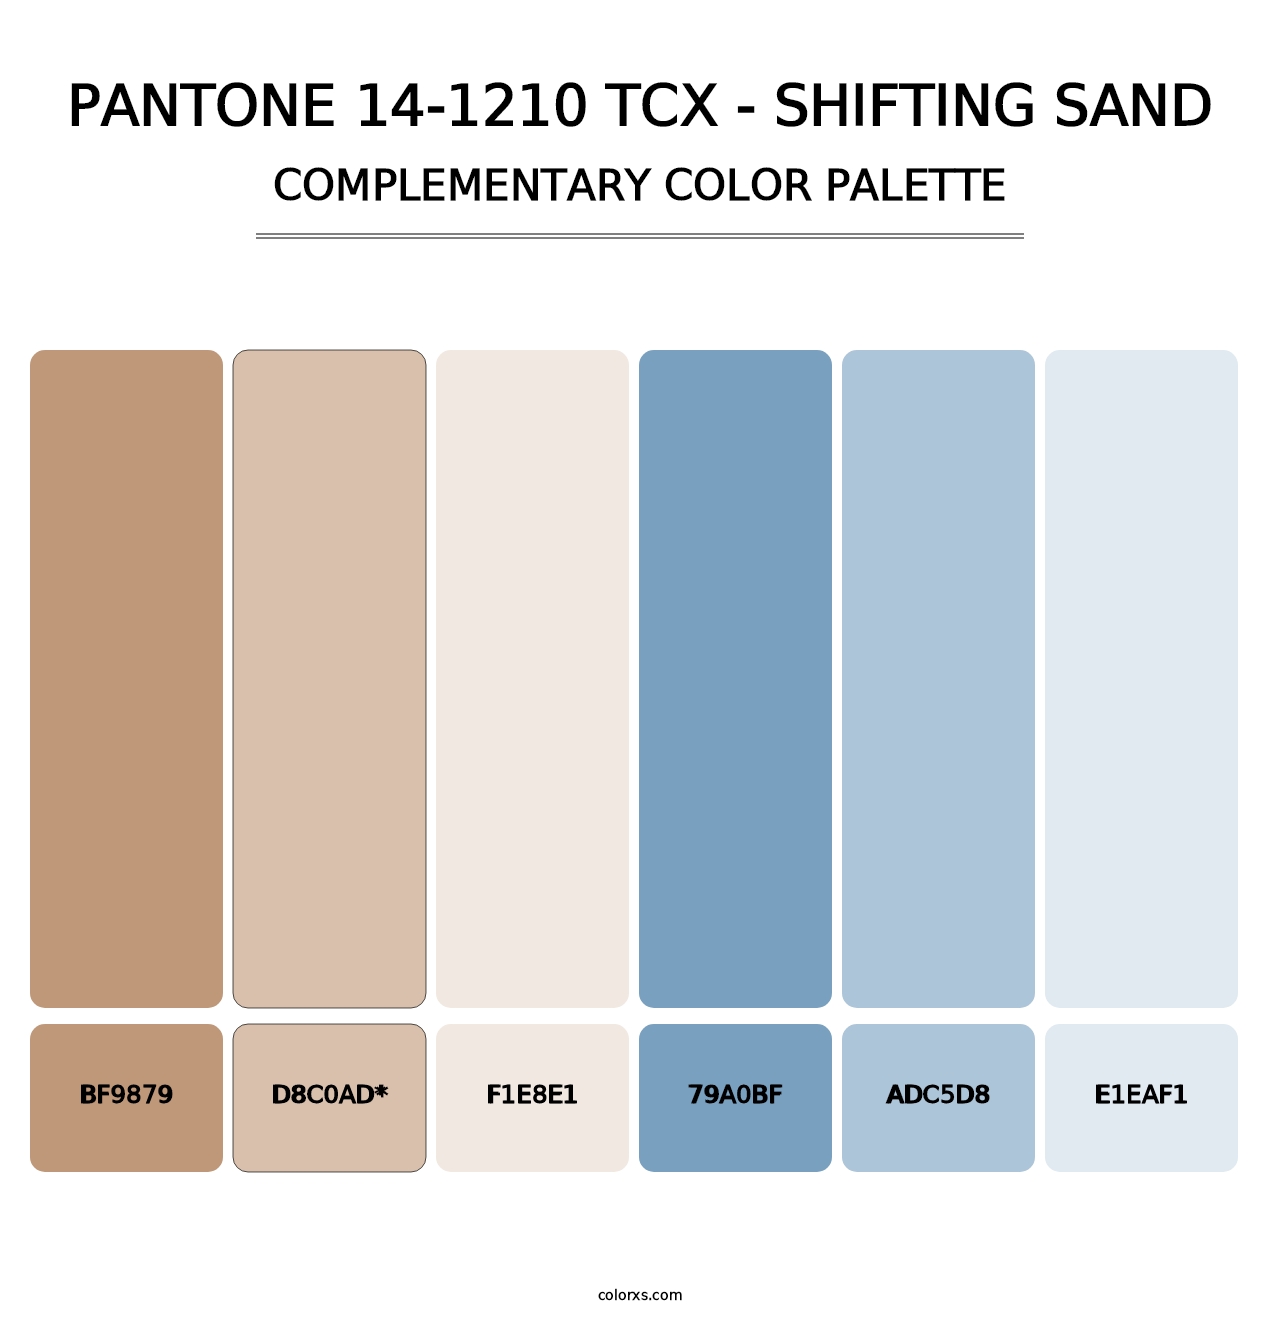 PANTONE 14-1210 TCX - Shifting Sand - Complementary Color Palette